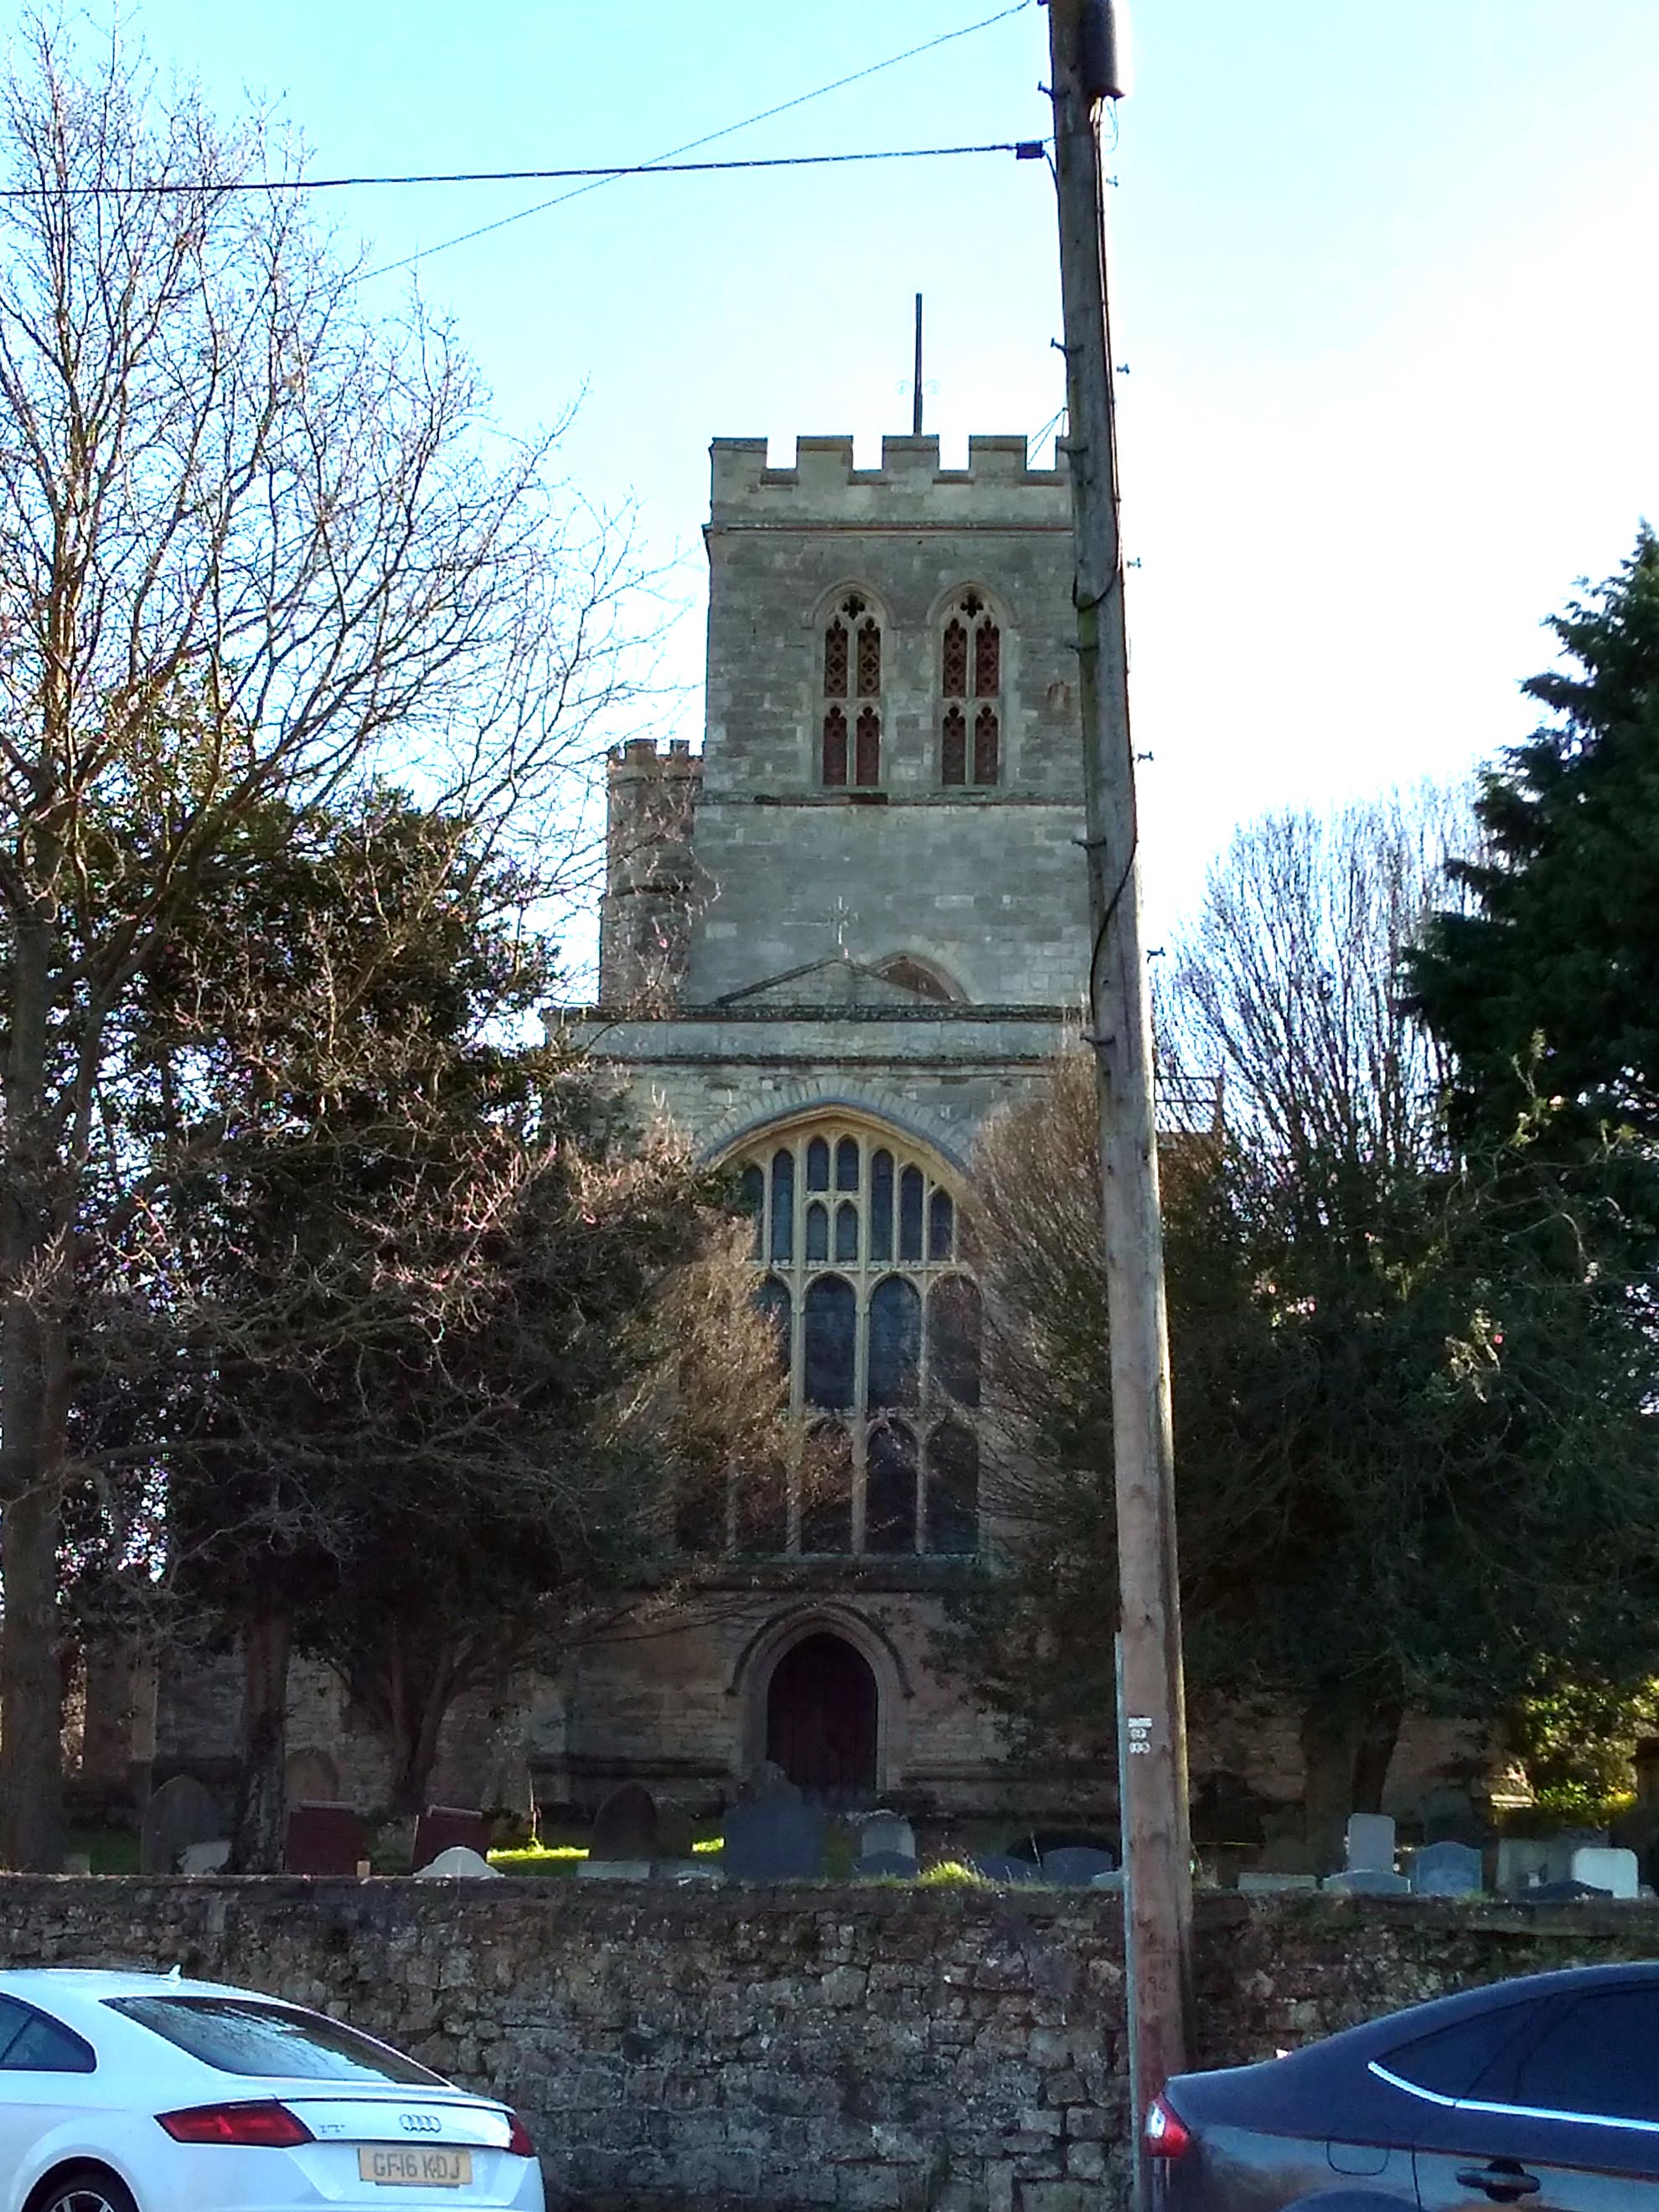 xSt Mary's, Thame